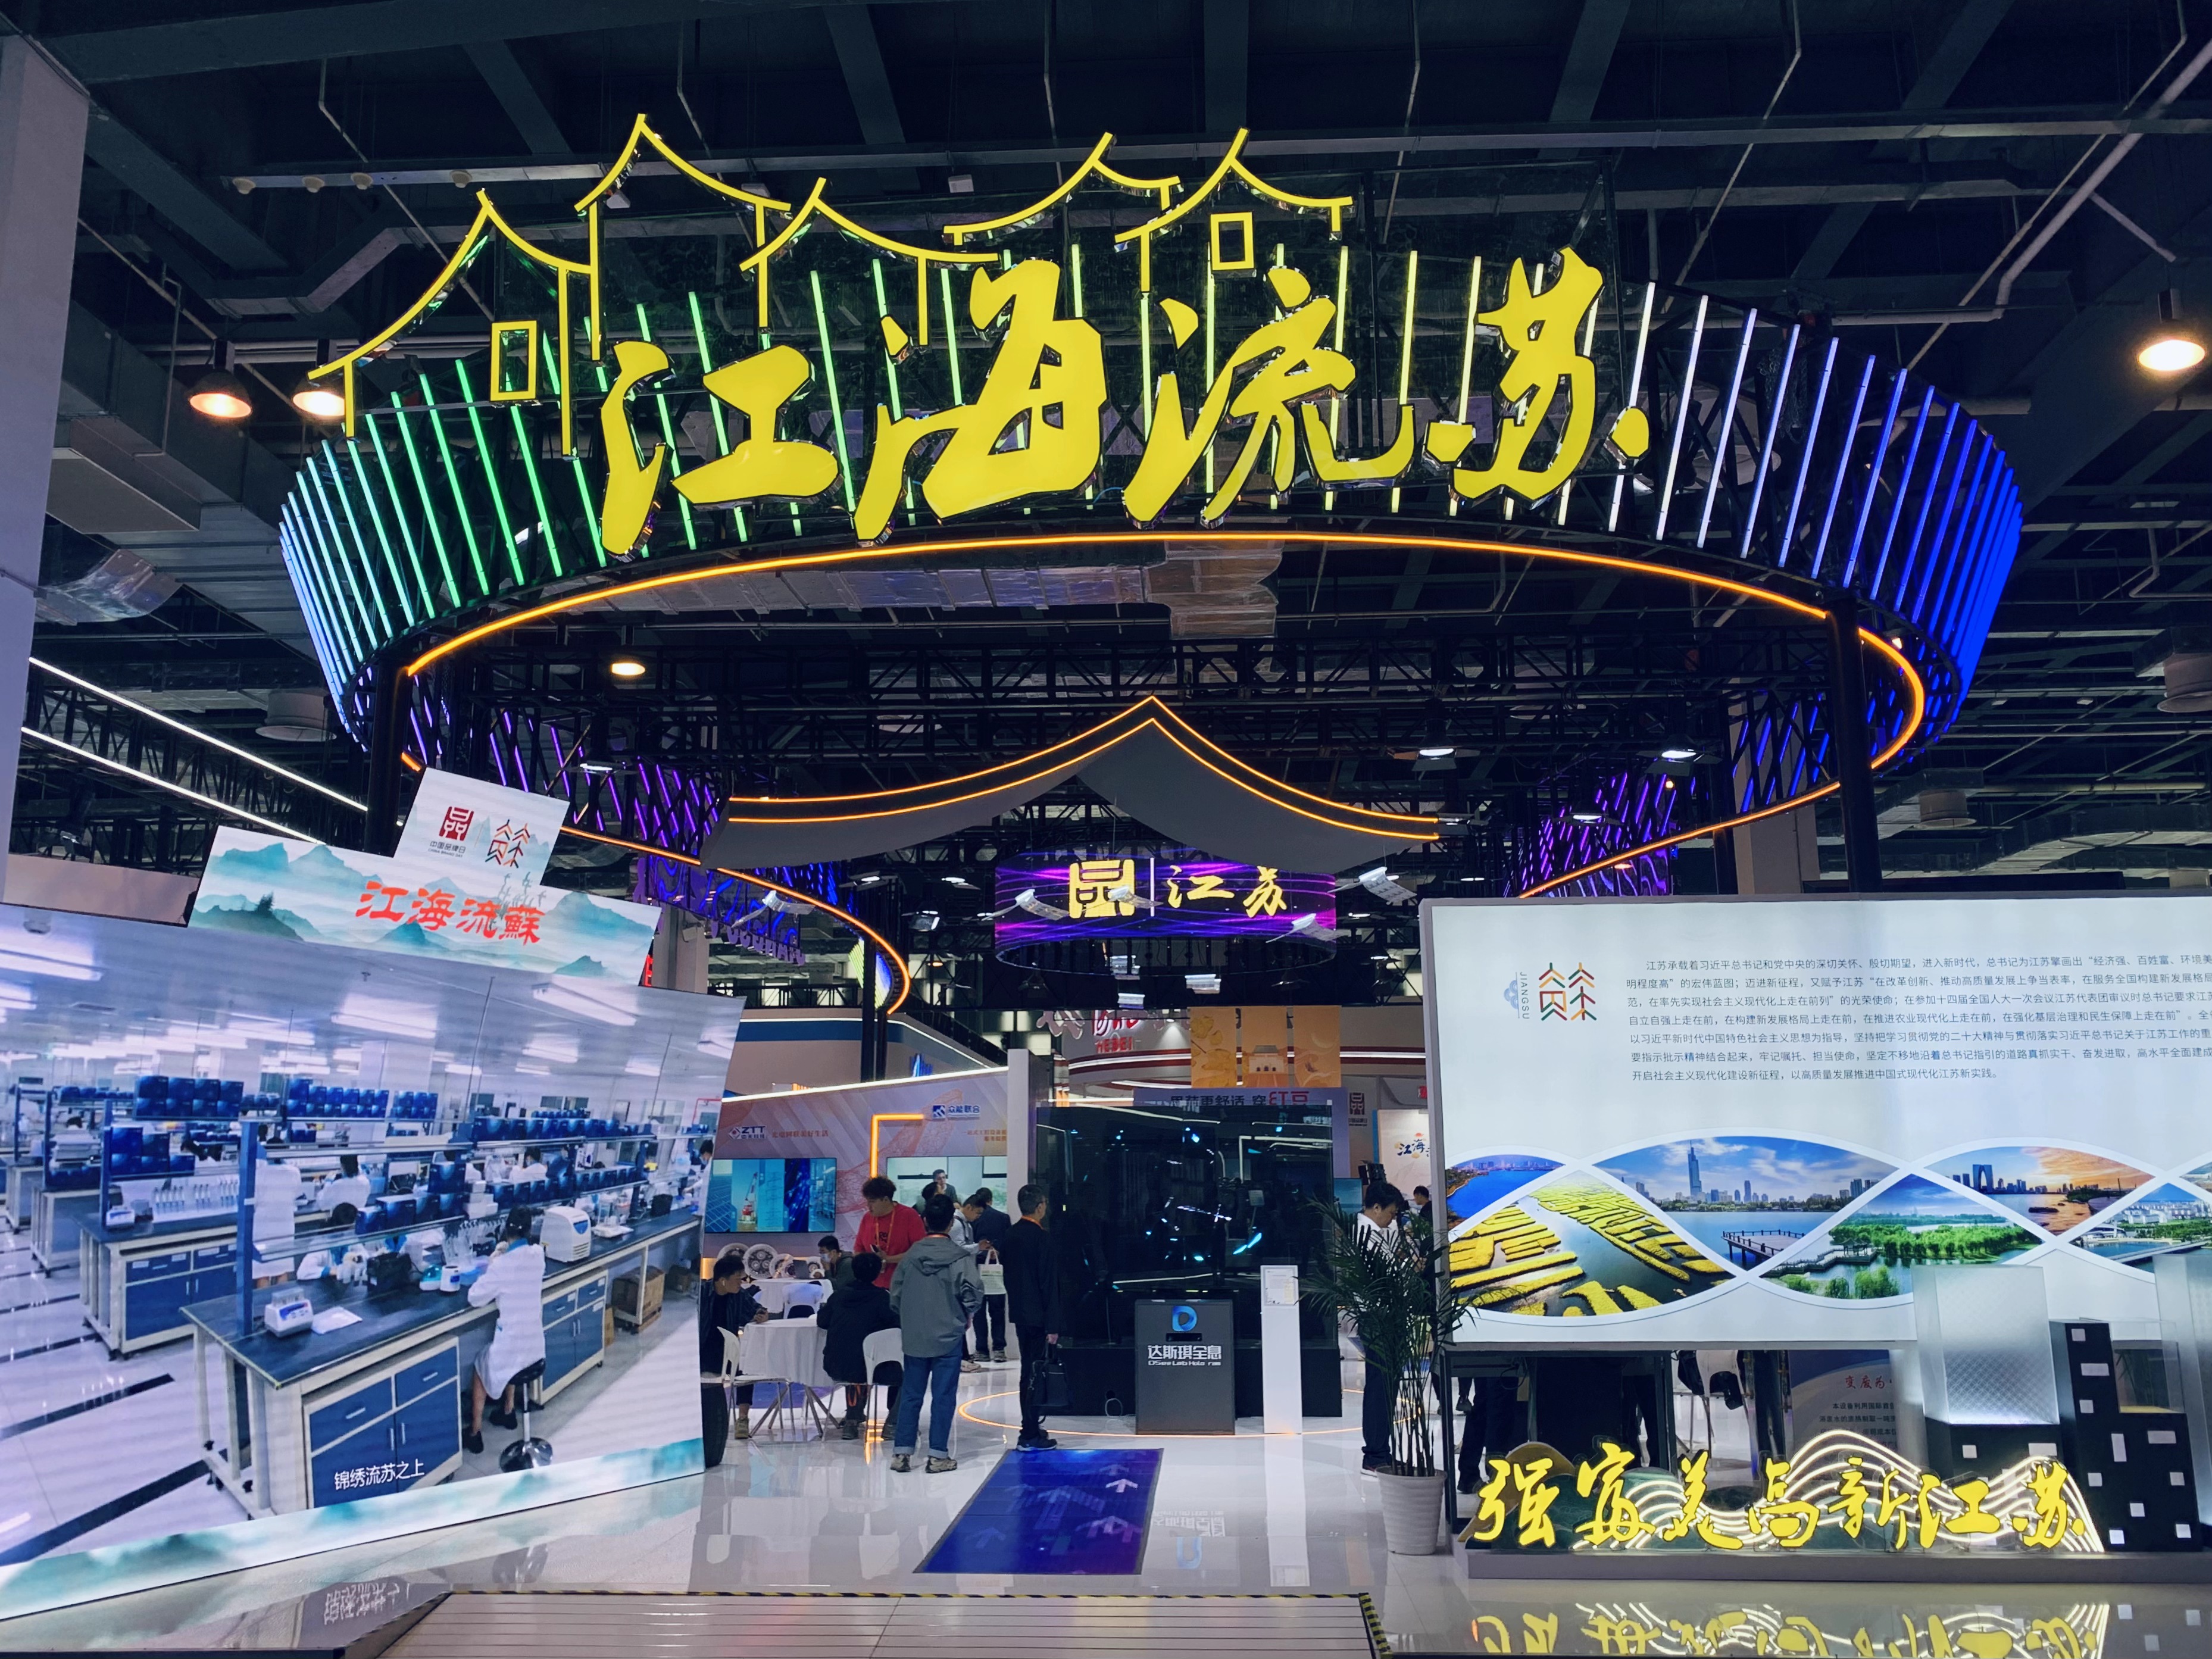 Chinese Brand Day | Minivision Technology Appears as "Jianghai Tassels" to Help Innovate the New Ecology of Jiangsu